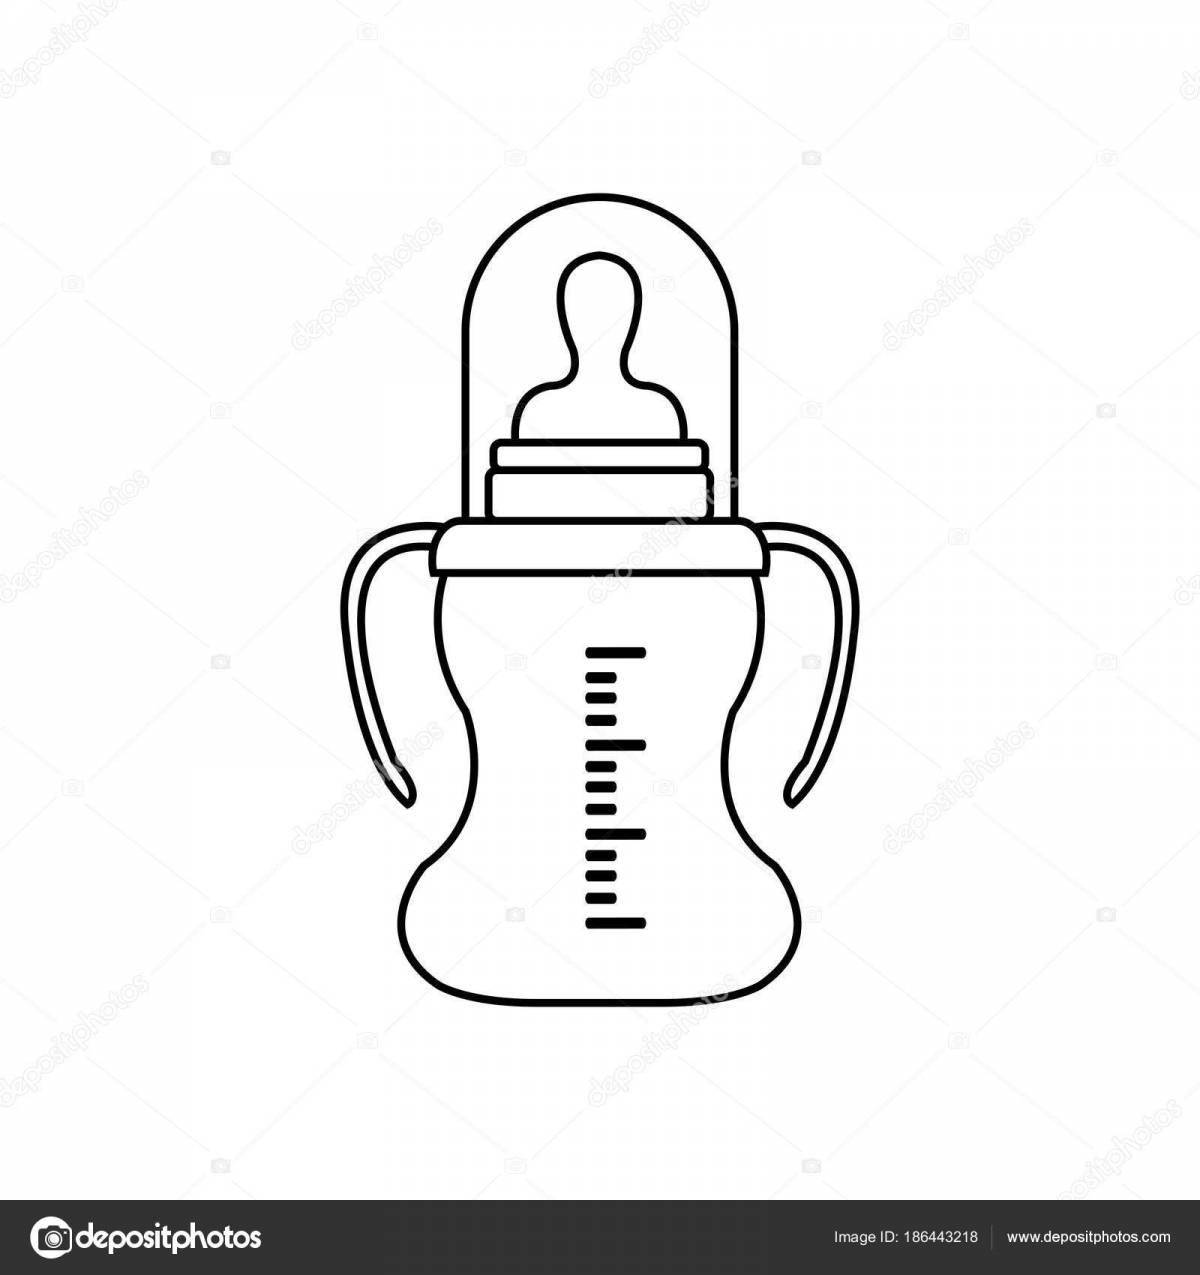 Exciting bottle coloring page for kids